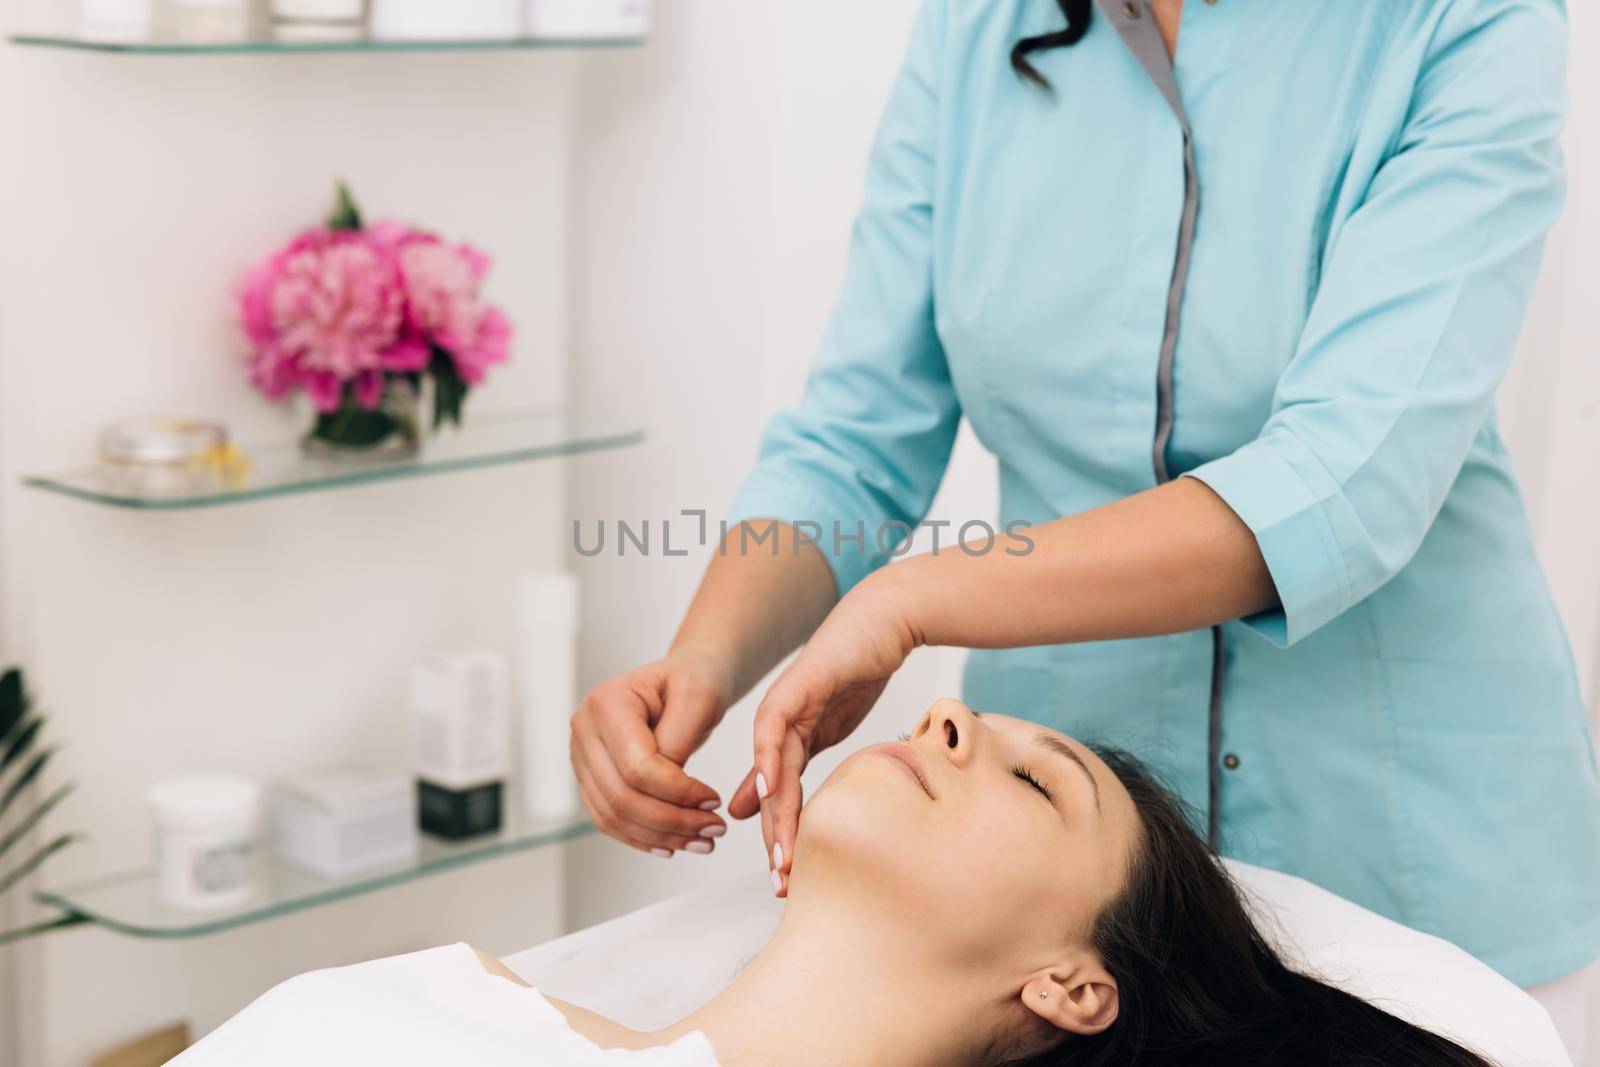 Face Massage in beauty spa salon. Beauty Treatments. Body care, skin care, wellness, wellbeing, beauty treatment concept. Spa facial Massage.